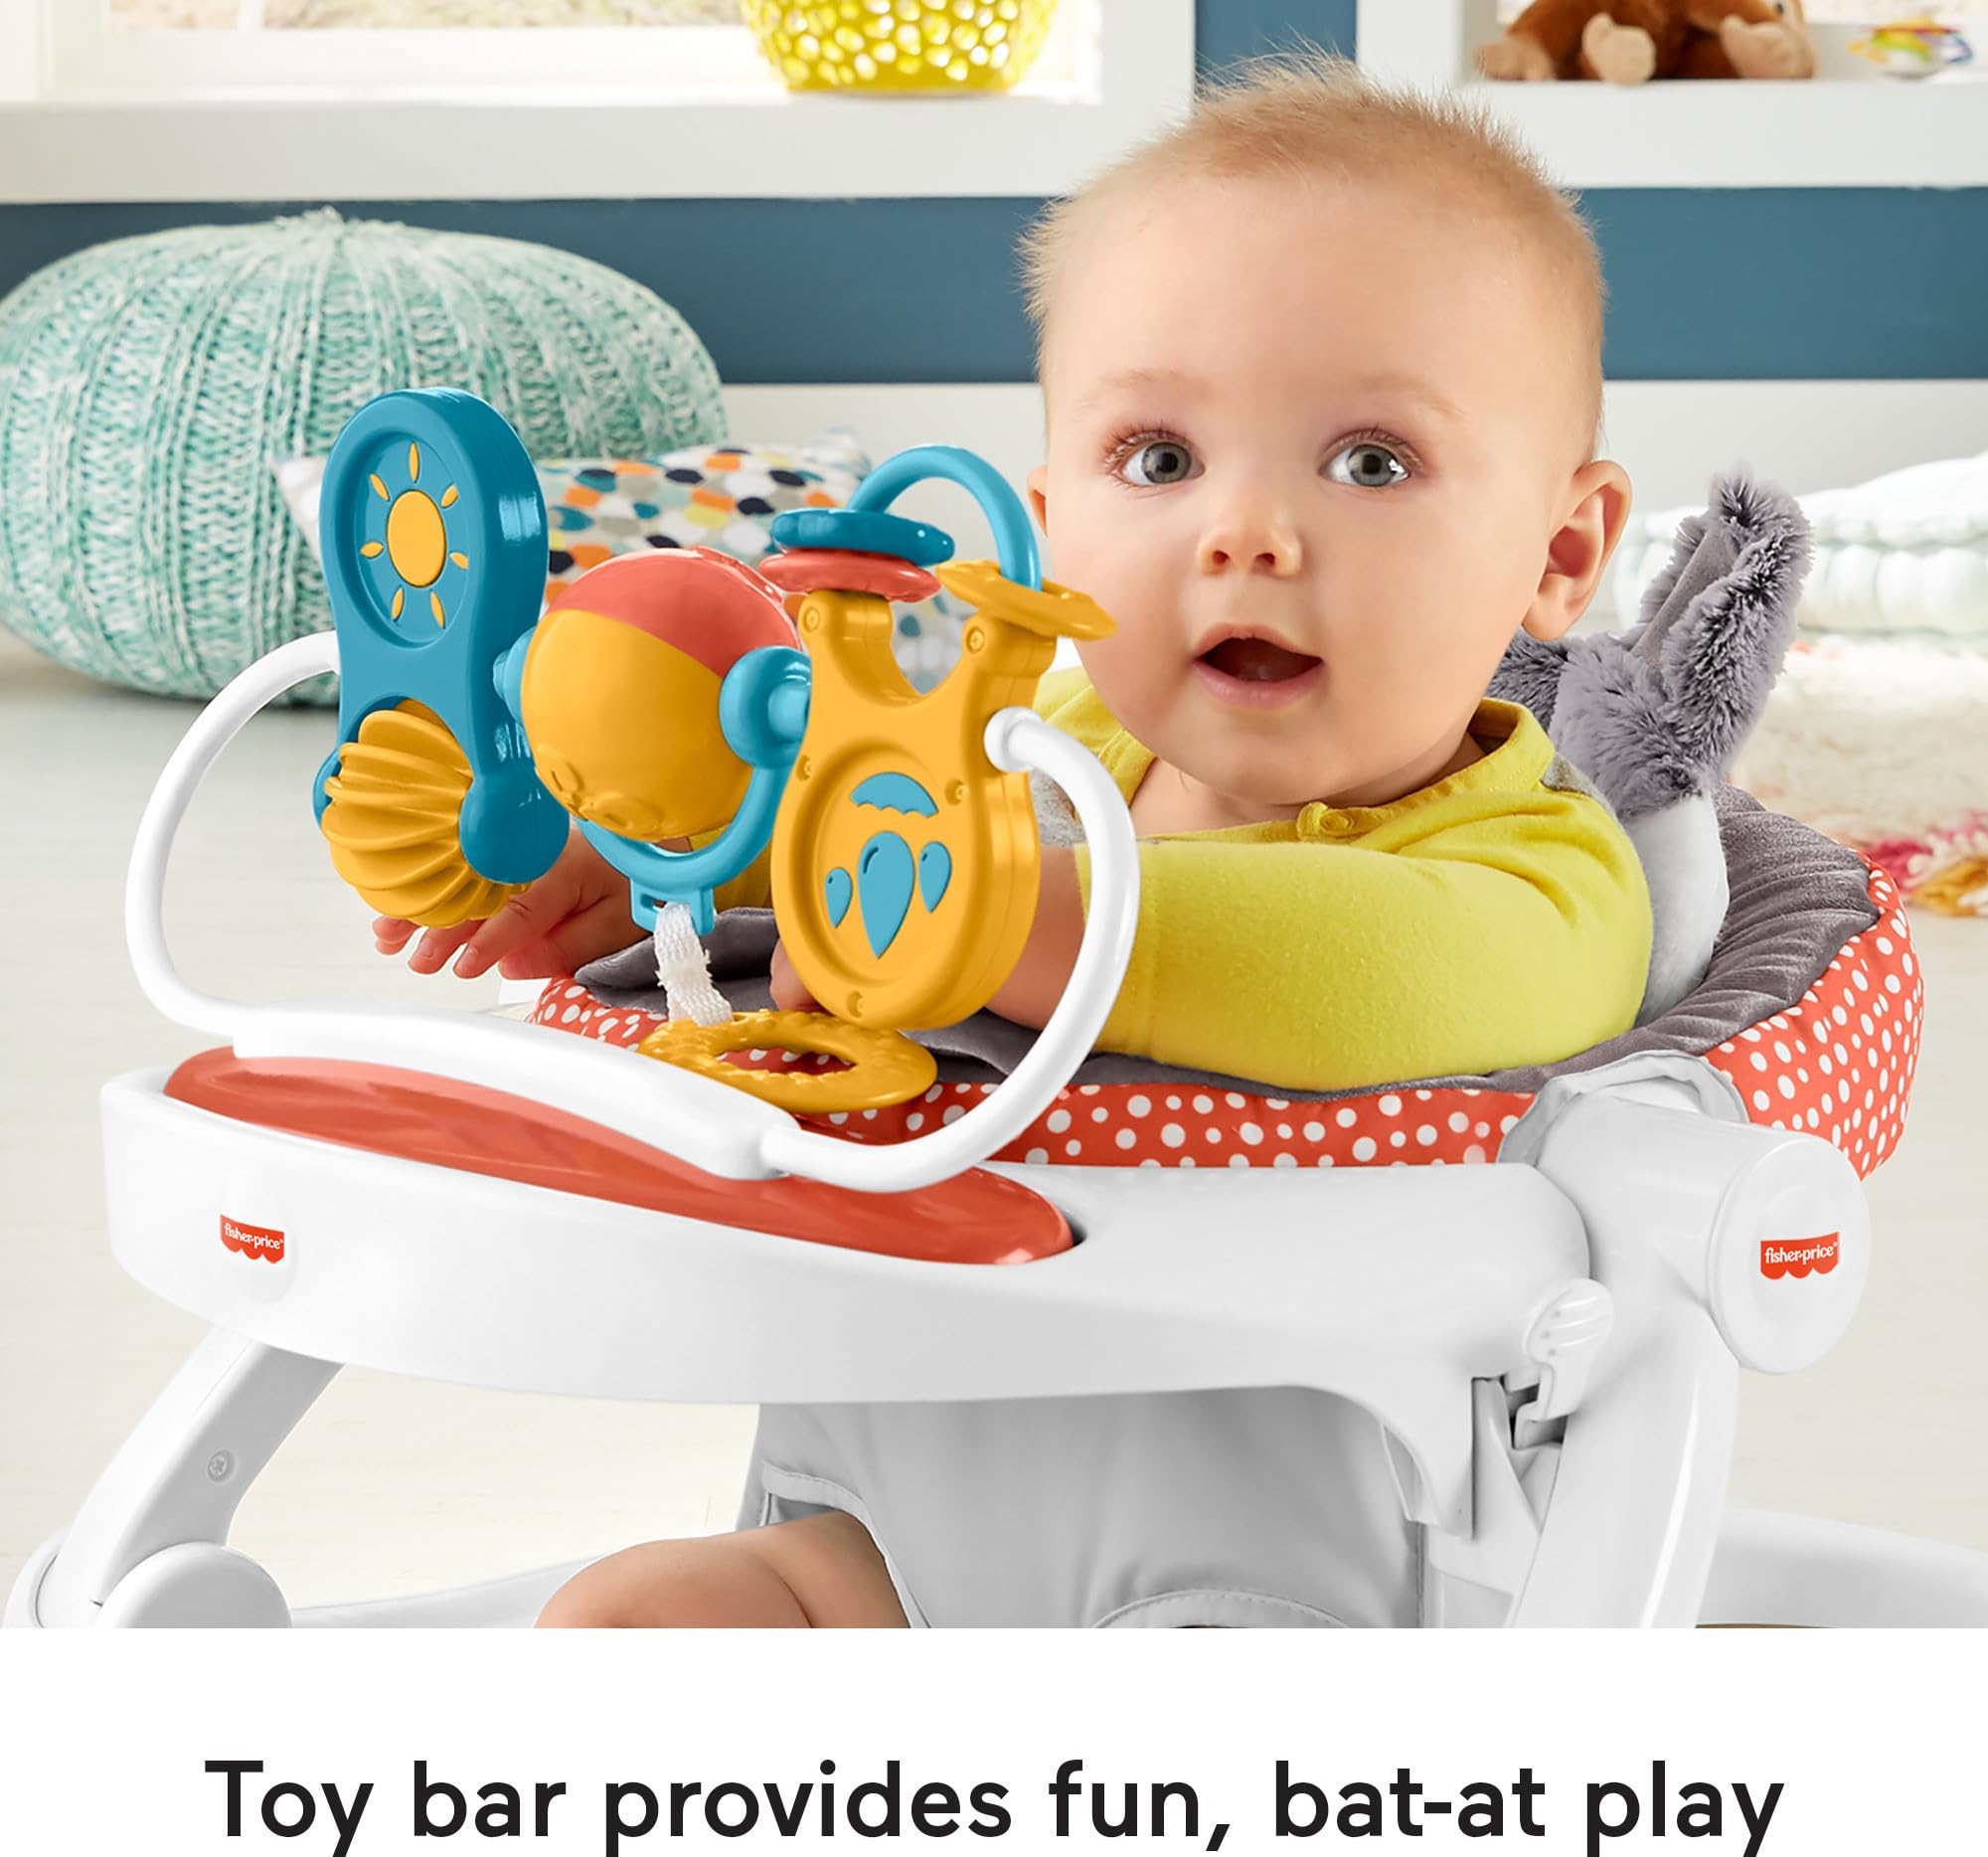 Fisher-Price Baby Portable Baby Chair Premium Sit-Me-Up Floor Seat with Snack Tray and Toy Bar,Plush Seat Pad, Peek-a-Boo Fox